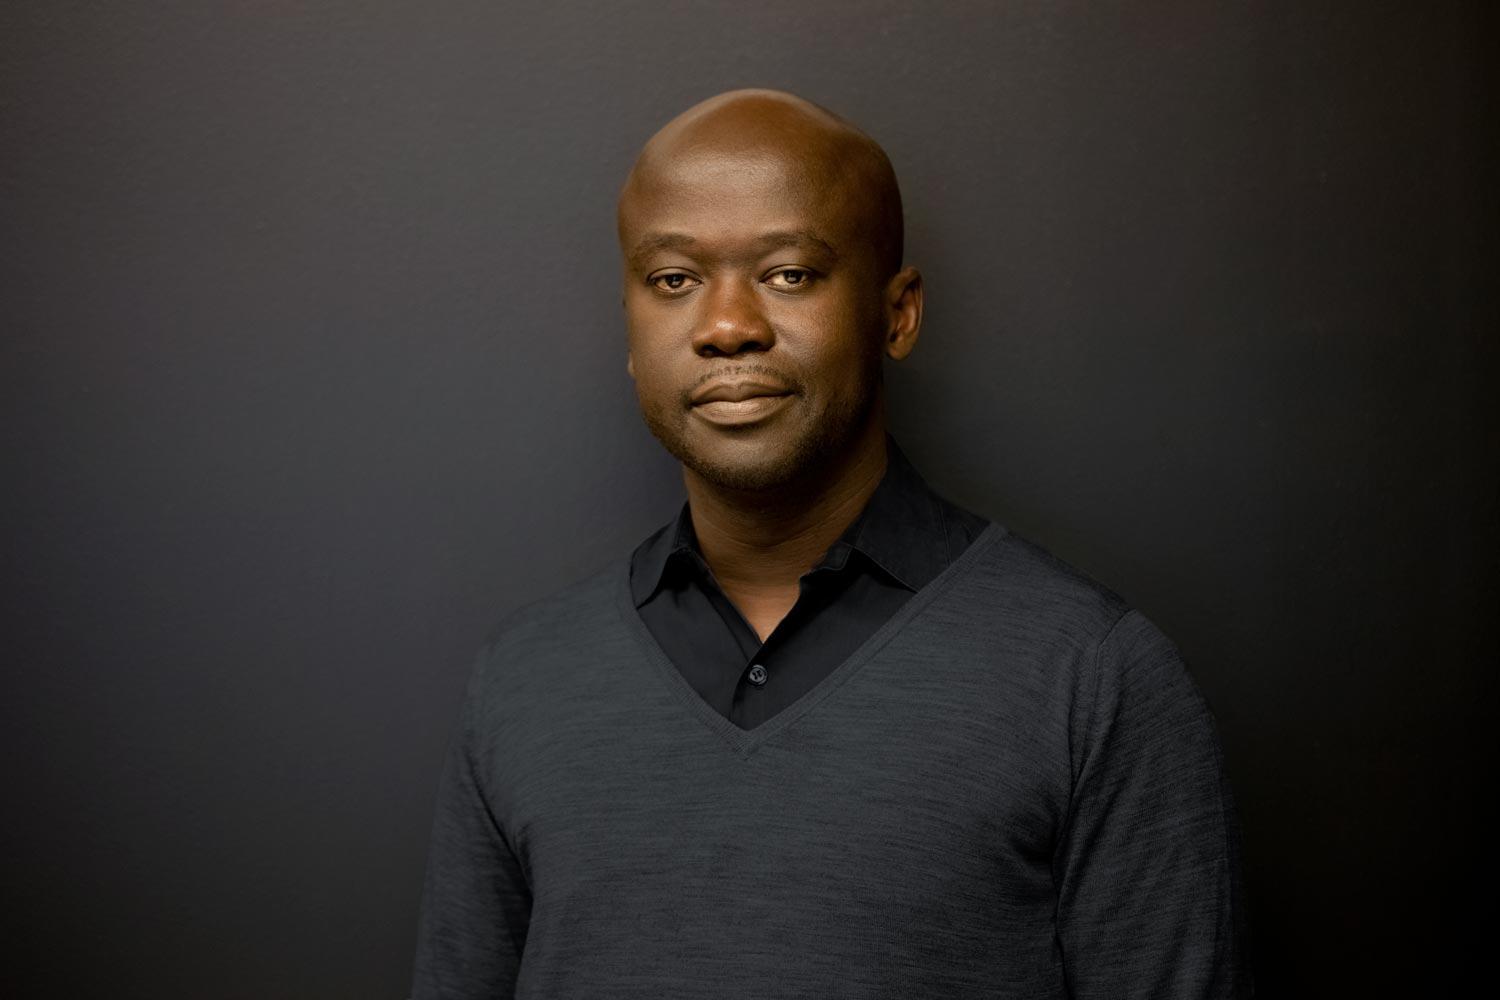 We are delighted to announce that Sir David Adjaye has been nominated for admission to an Honorary Doctorate in June